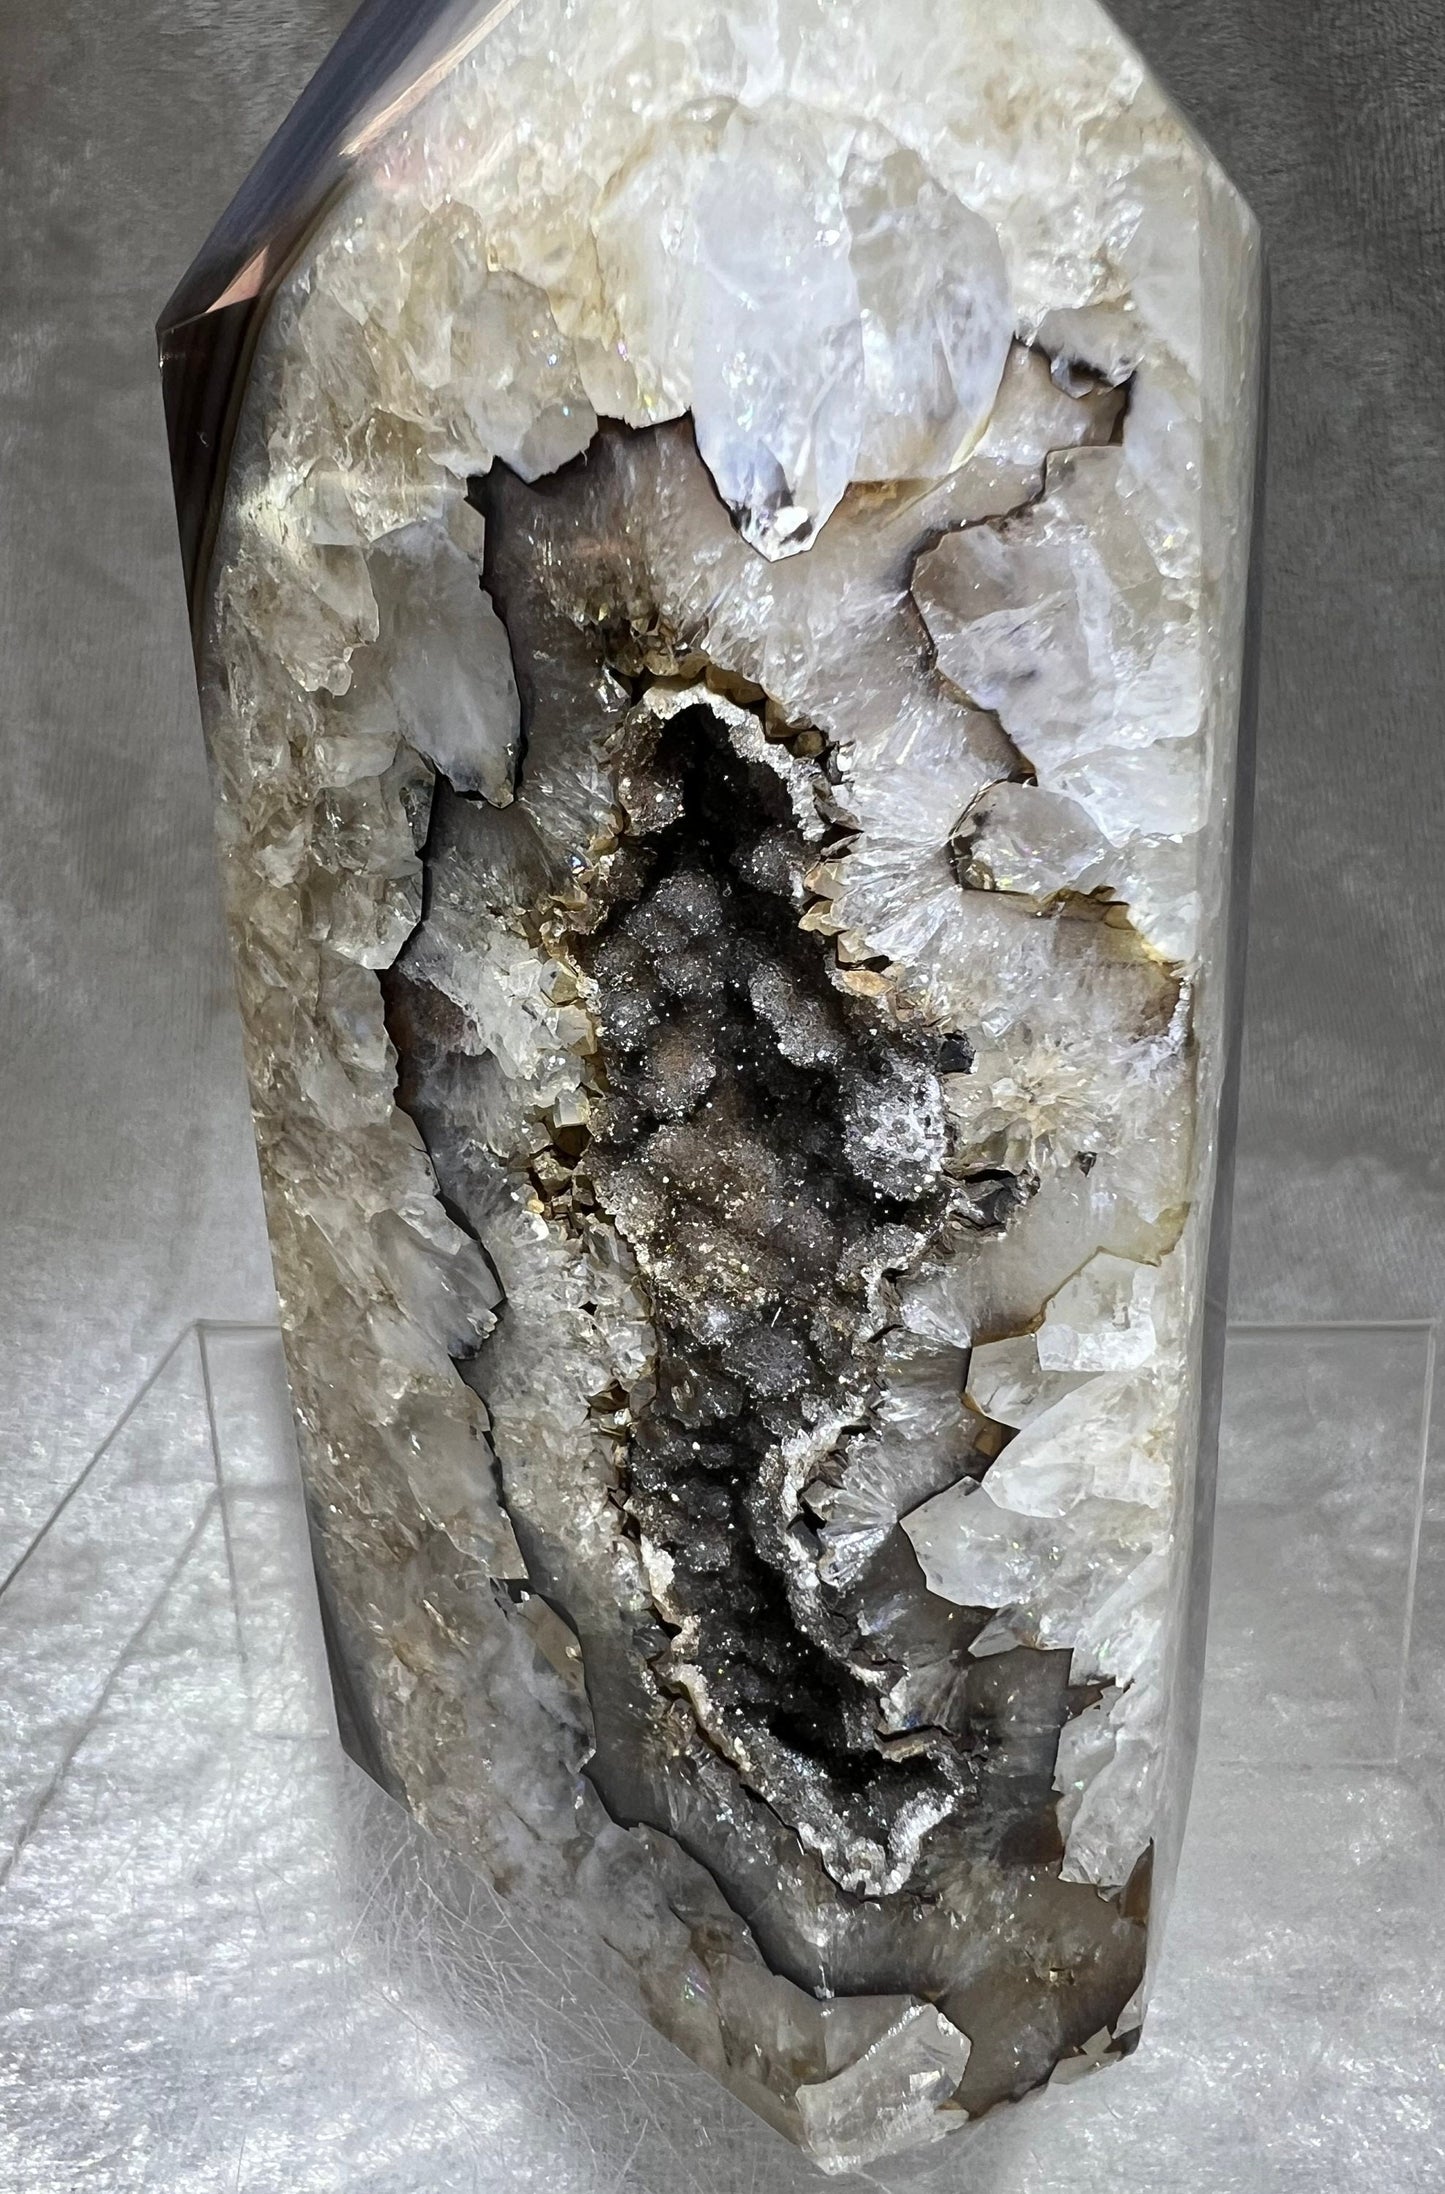 Large Druzy Agate Tower. 1.8 lbs. Incredible One Of A Kind Druzy With Amazing Flash! Stunning Brazilian Druzy Agate